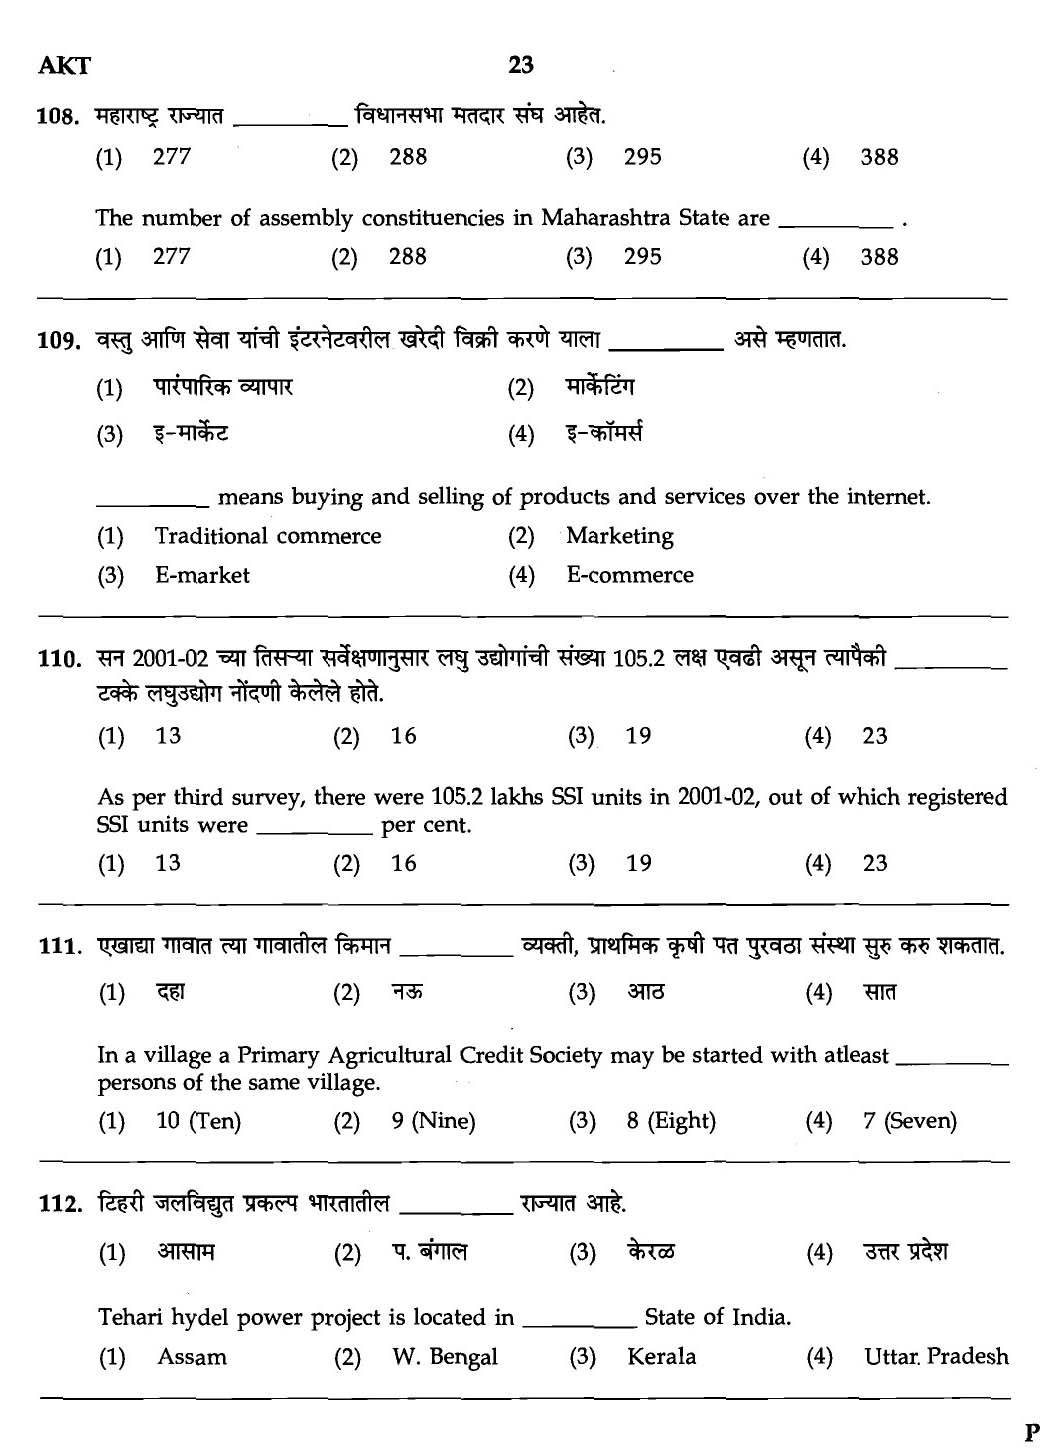 MPSC Agricultural Services Exam 2007 General Question Paper 21